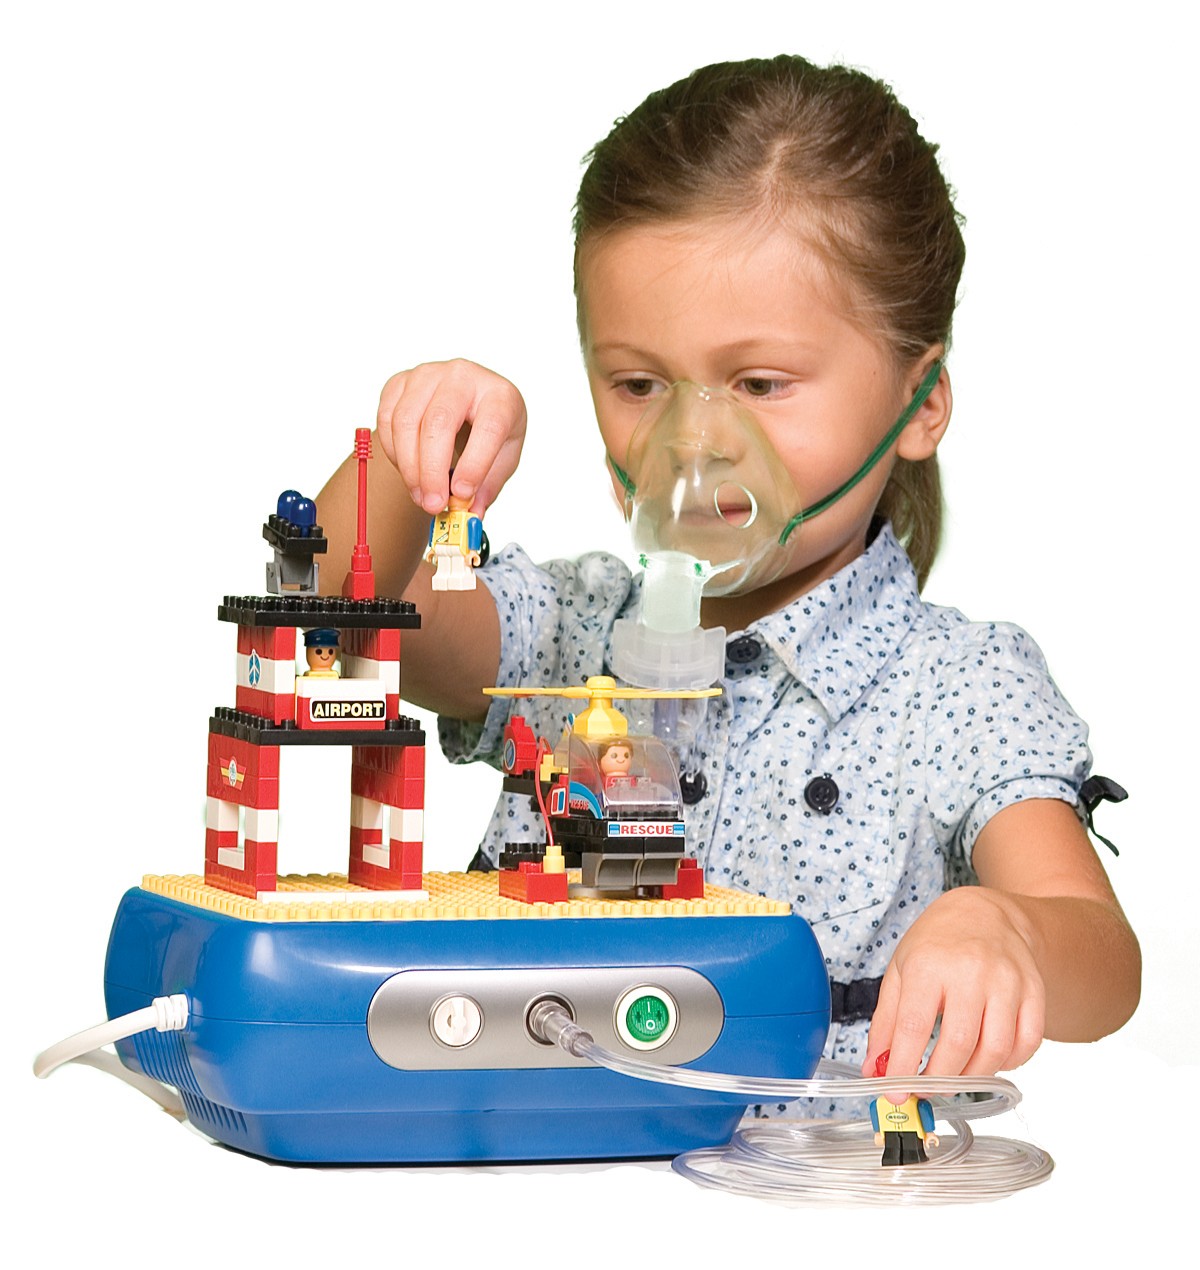 CHILD PLAYING WITH INTERACTIVE BUILDING BLOCK COMPRESSOR NEBULIZER